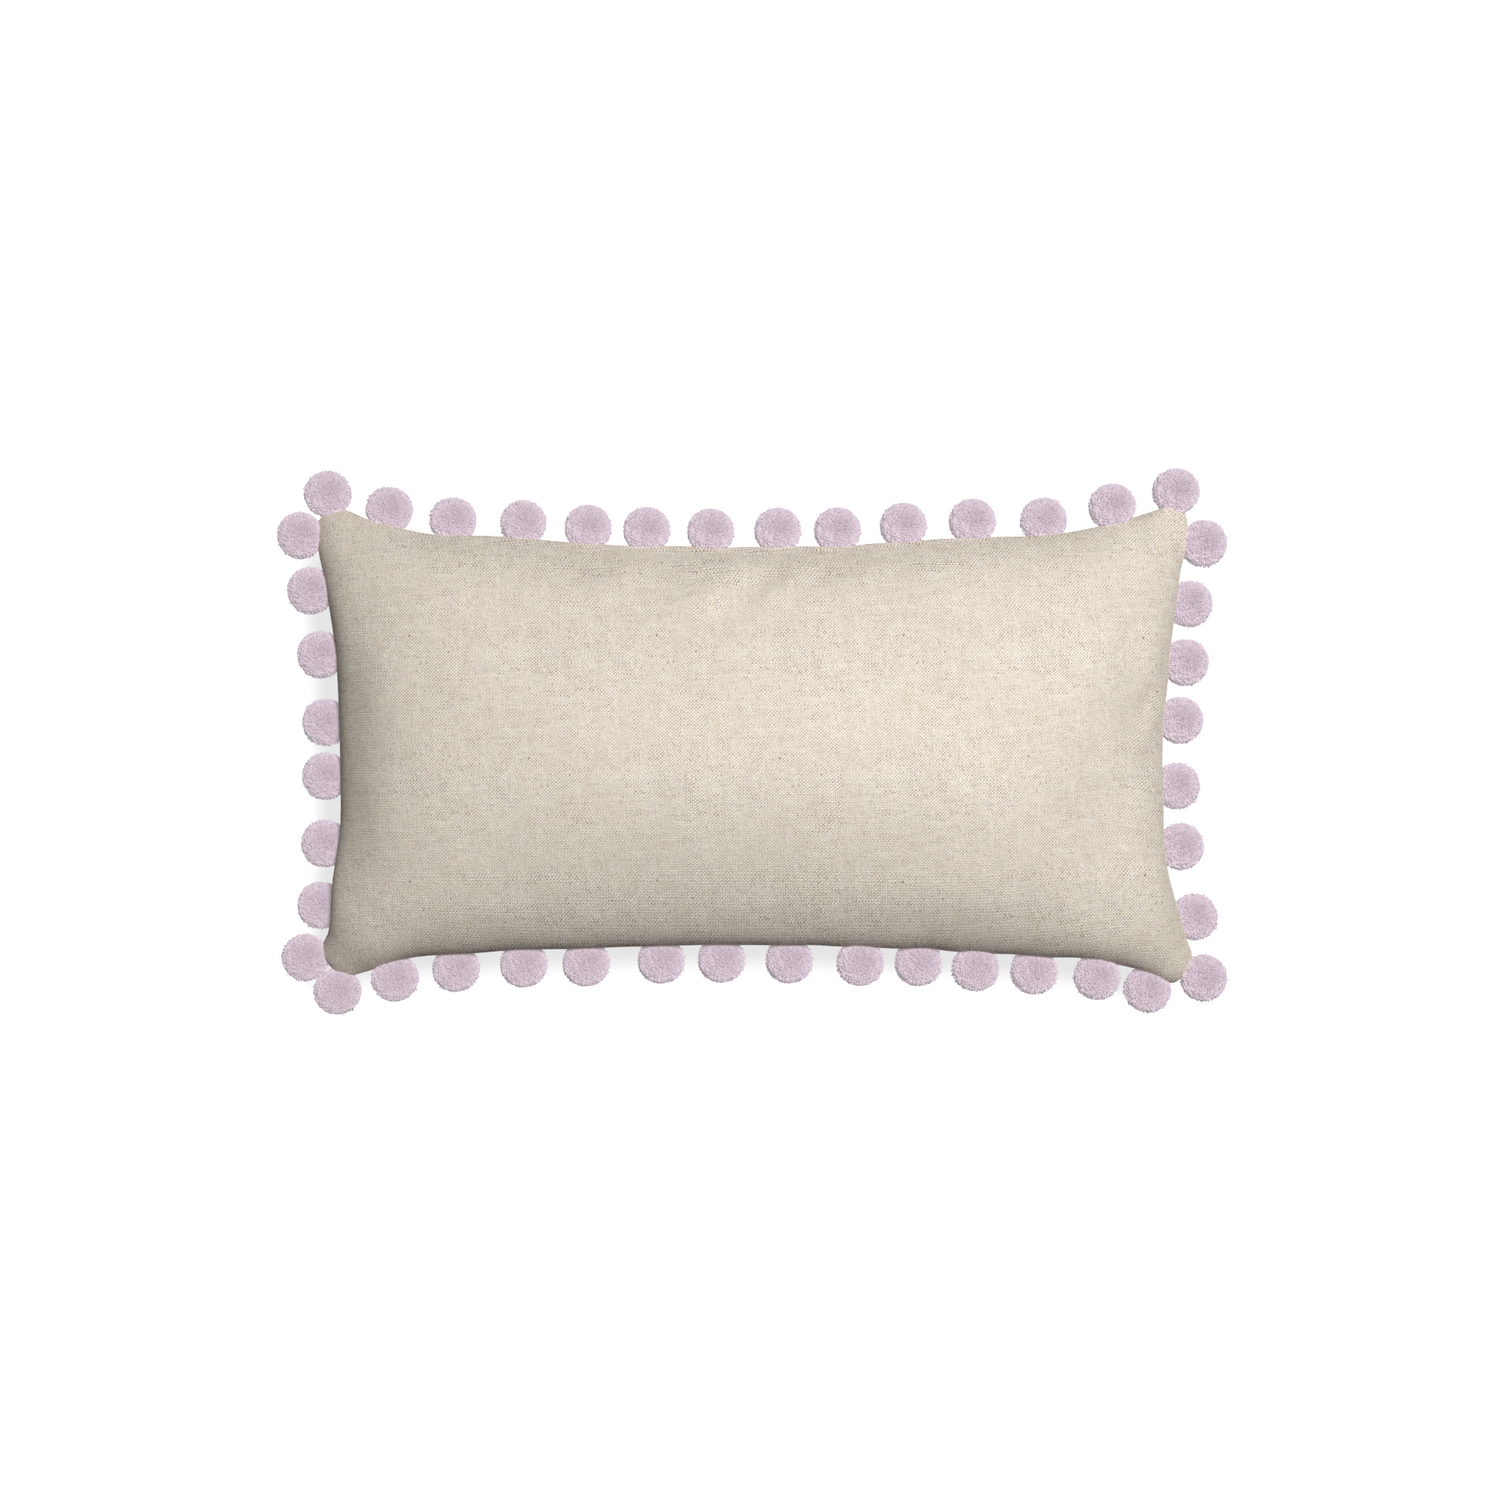 Petite-lumbar oat custom light brownpillow with l on white background